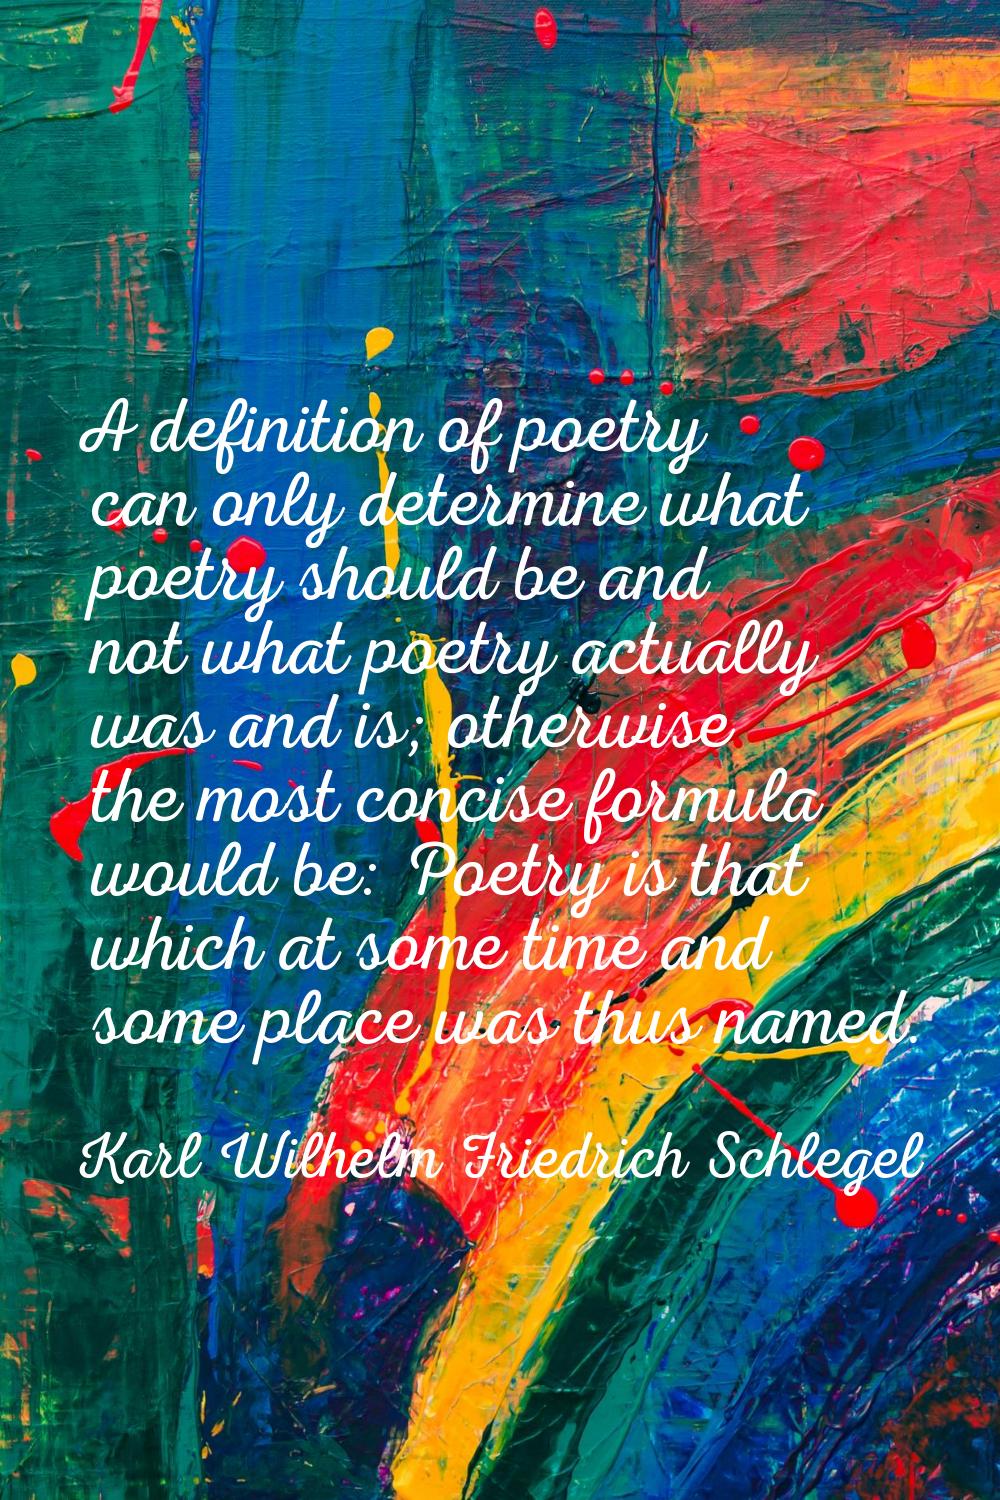 A definition of poetry can only determine what poetry should be and not what poetry actually was an